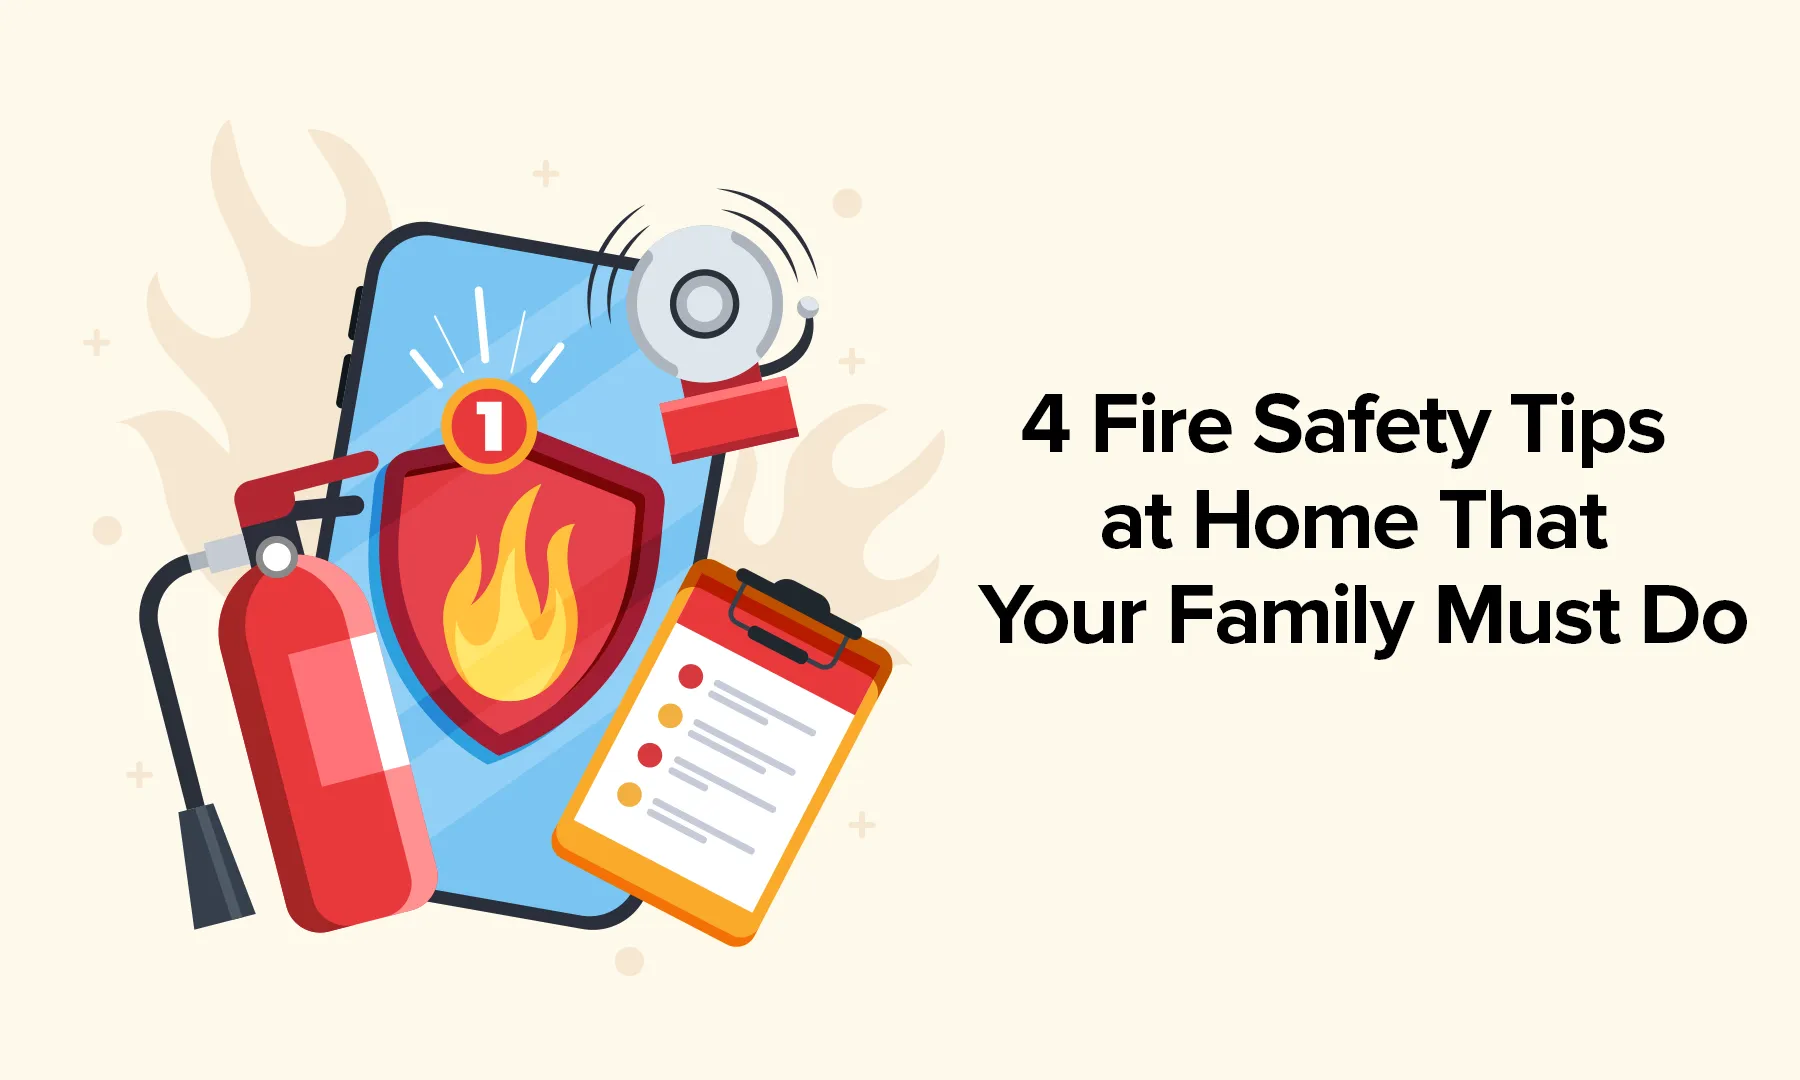 4 Fire Safety Tips at Home That Your Family Must Do